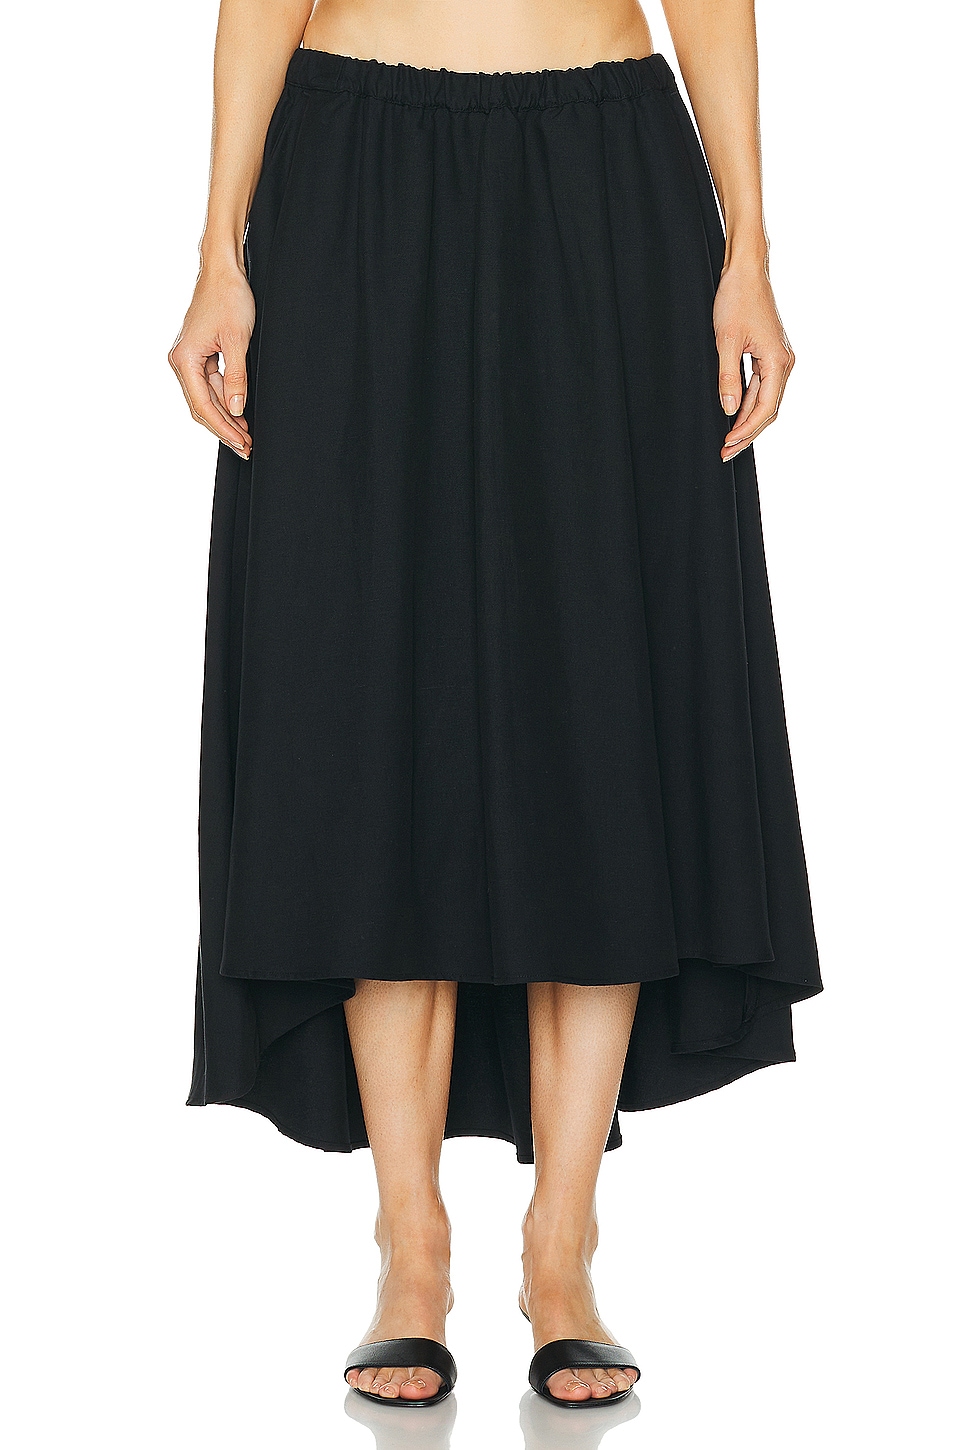 Image 1 of Enza Costa Twill Circle Skirt in Black